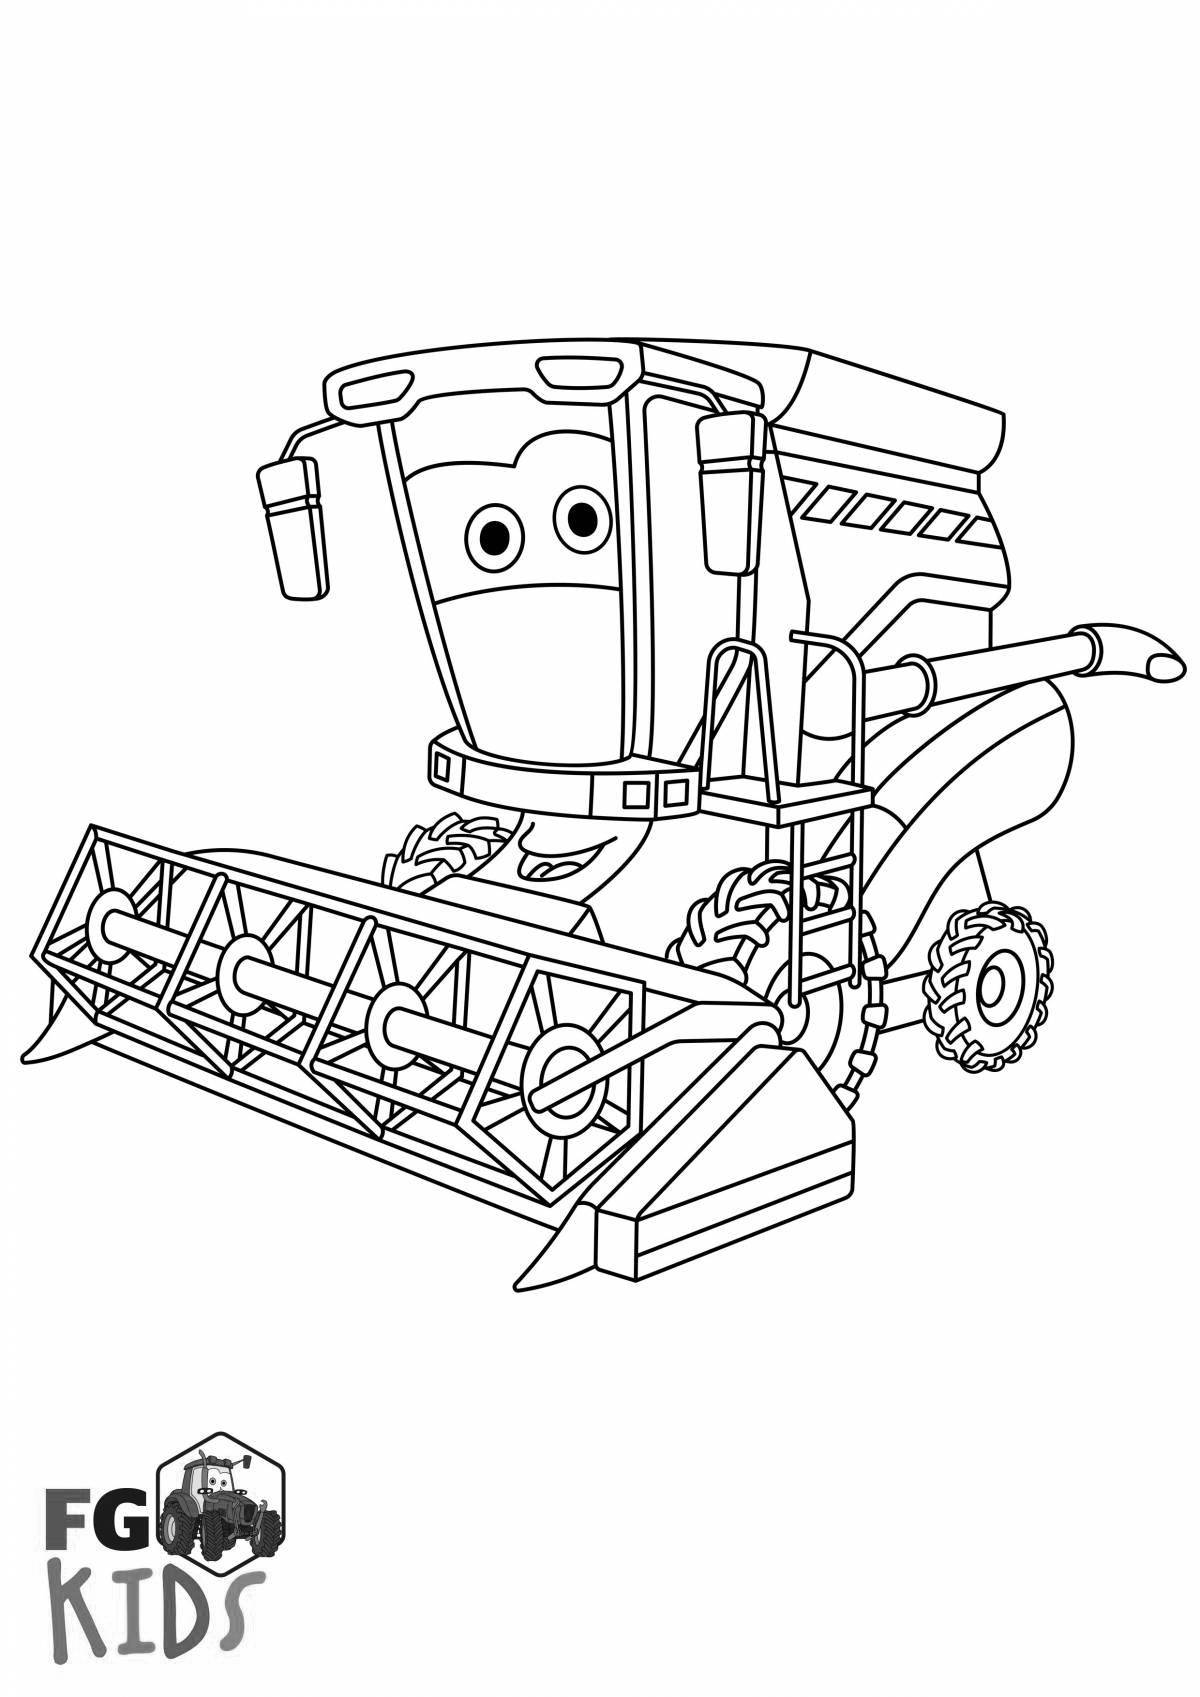 Gorgeous Harvester Coloring Page for Toddlers